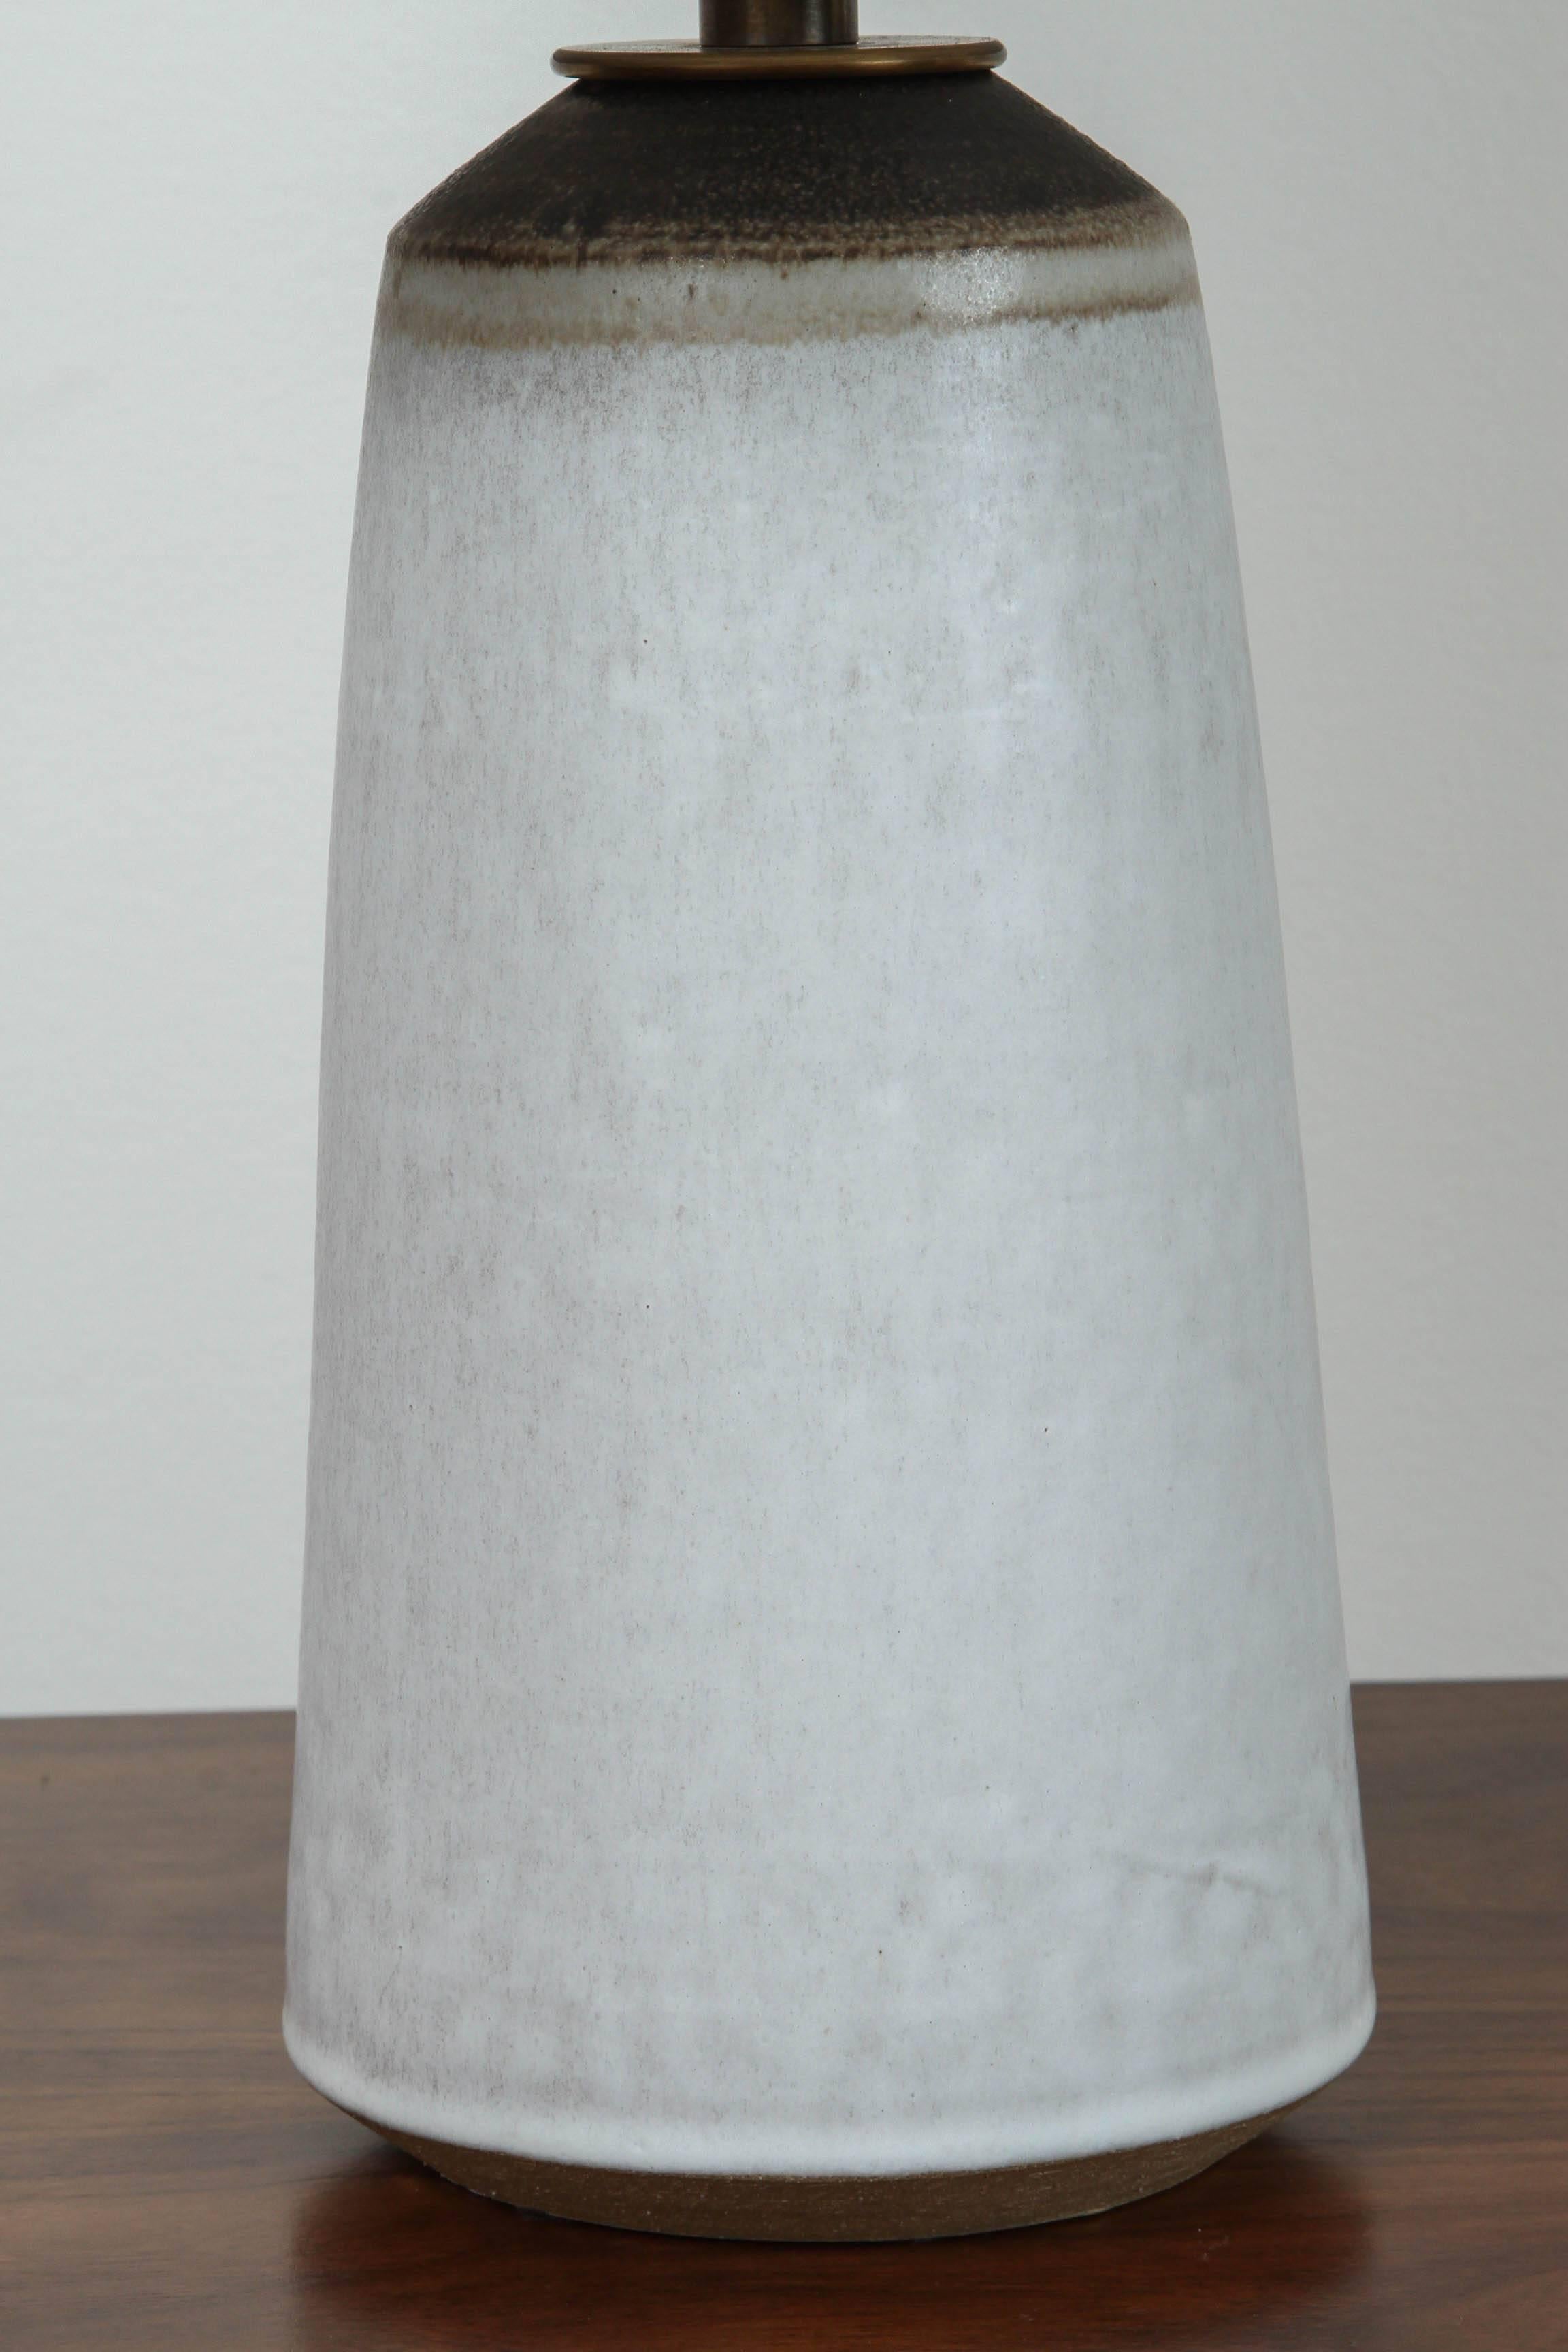 American Pair of White Birch Ceramic Table Lamp by Victoria Morris